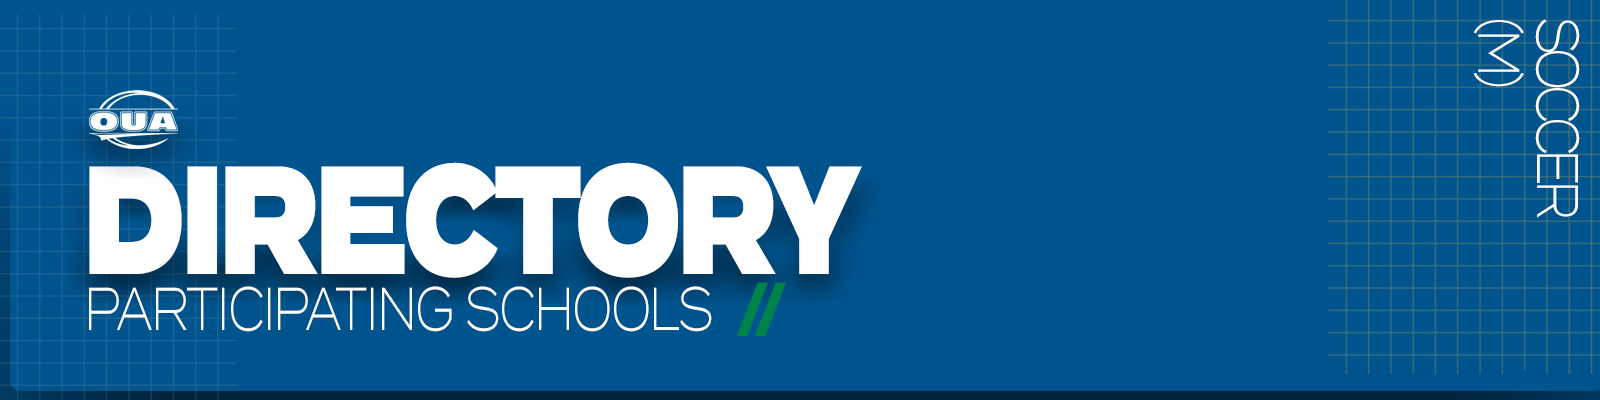 Predominantly blue graphic with large white text on the left side that reads 'Directory, Participating Schools' and small white vertical text on the right side that reads 'Soccer M'